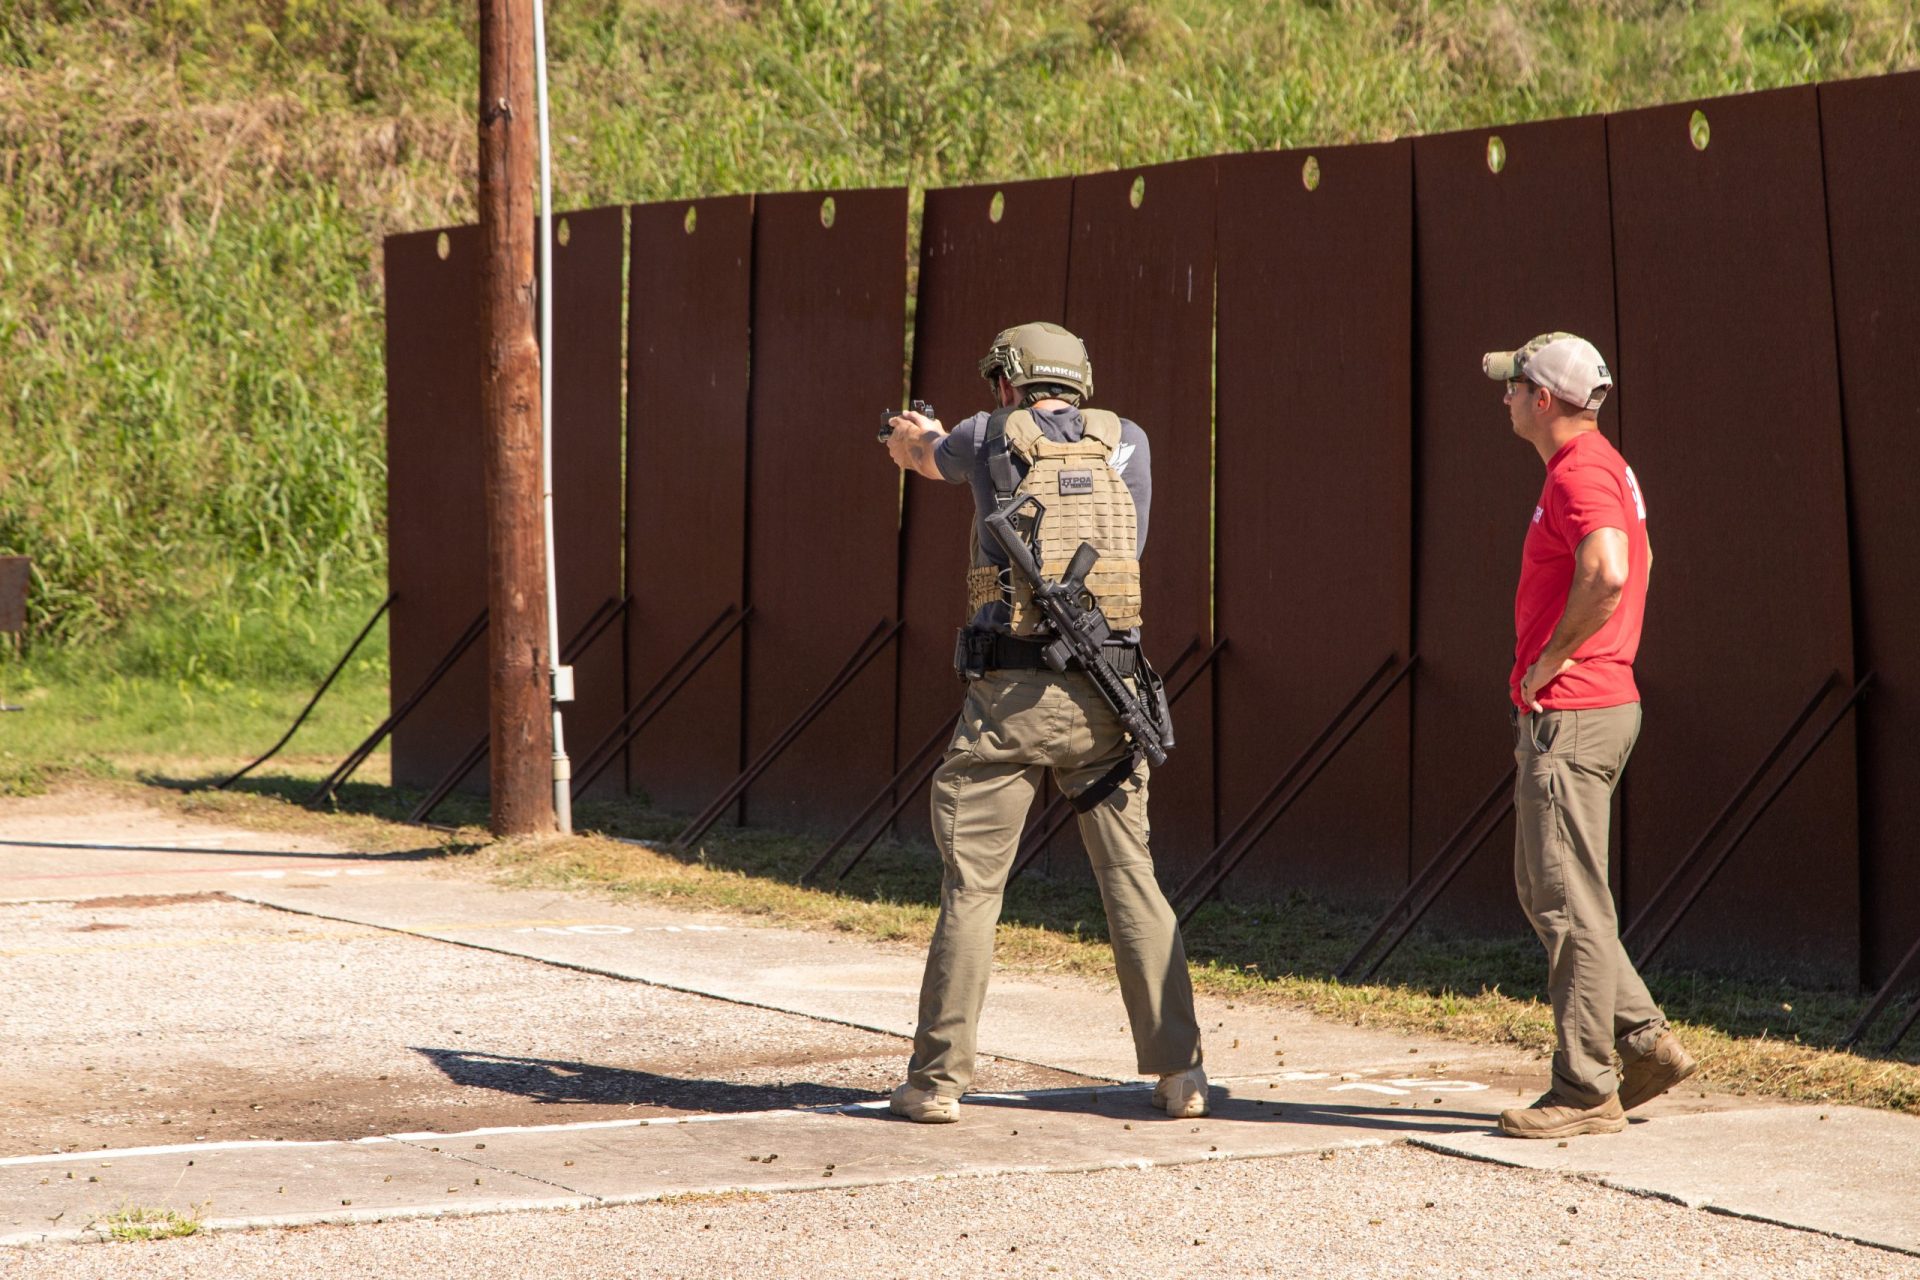 Firearm Training with a rifle and a pistol at a gun range